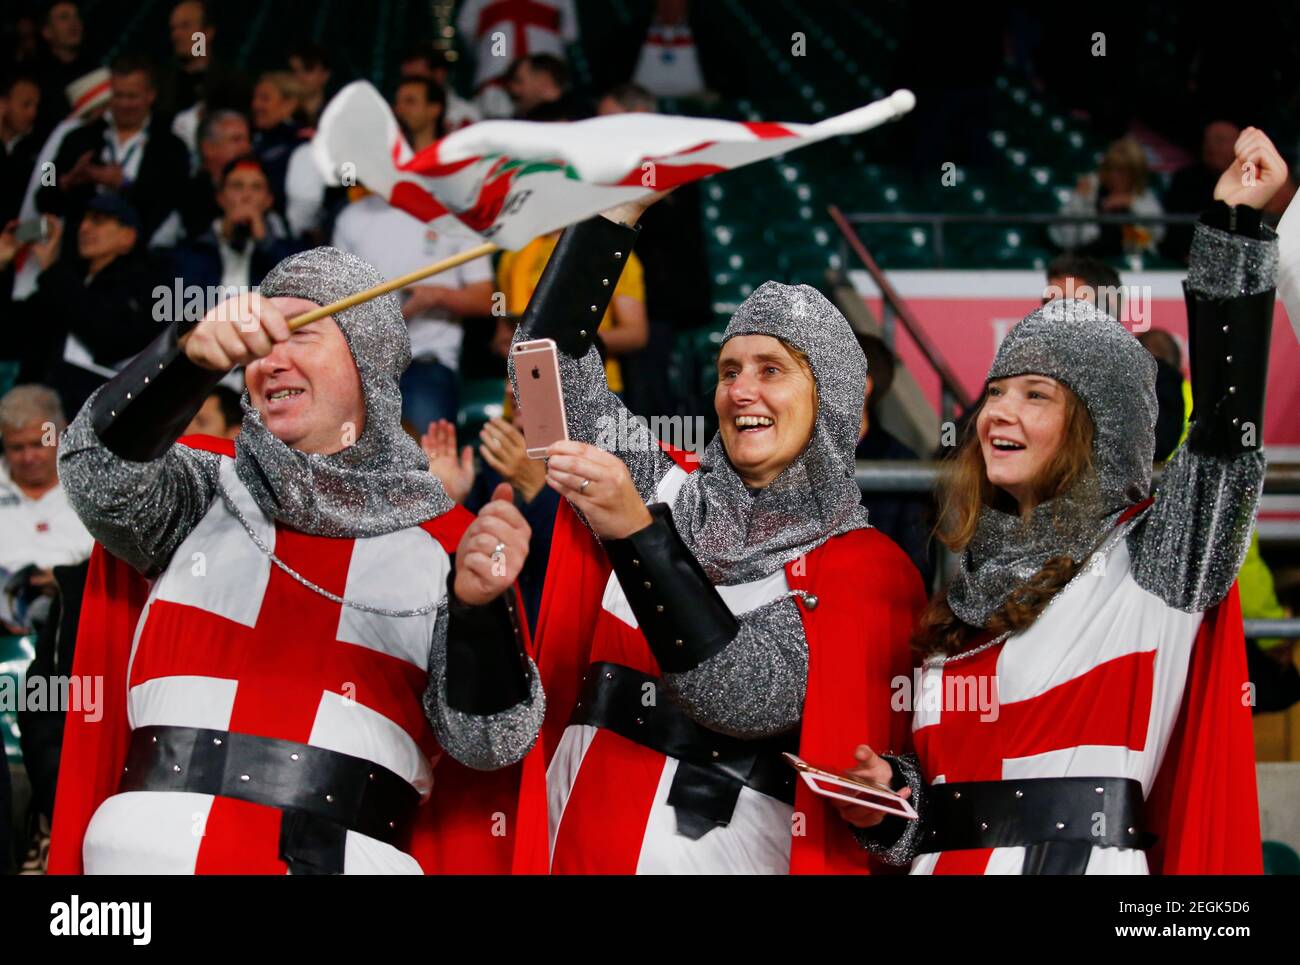 Rugby Union - England v Australia - IRB Rugby World Cup 2015 Pool A - Twickenham Stadium, London, England - 3/10/15  England fans before the match  Reuters / Andrew Winning  Livepic Stock Photo